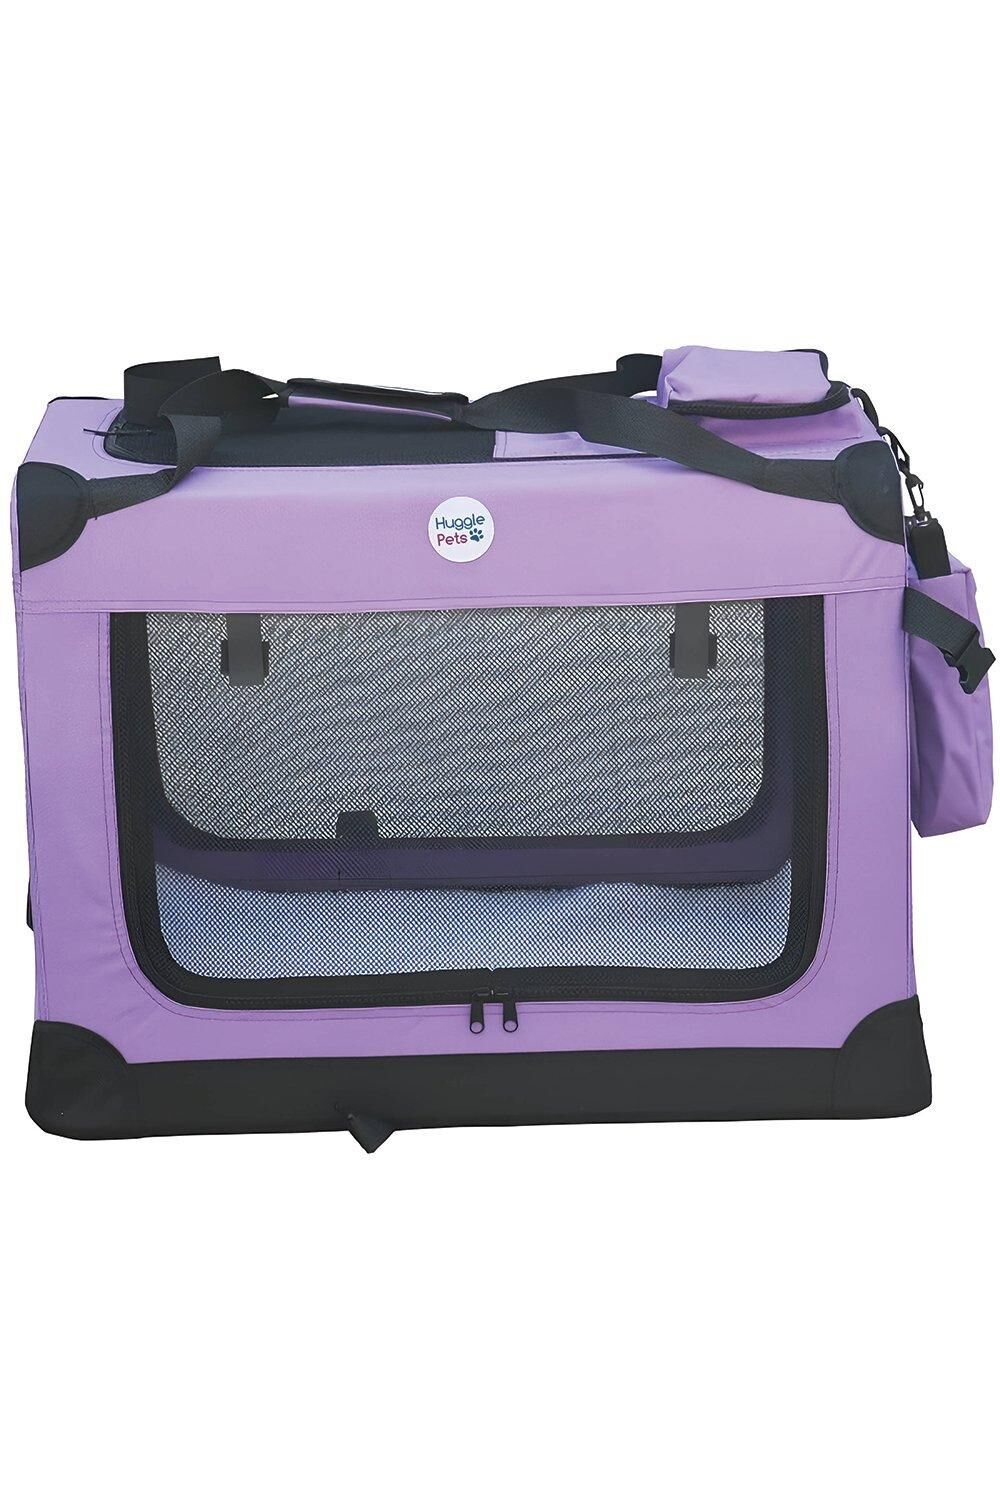 HugglePets Fabric Crate Foldable Pet Carrier